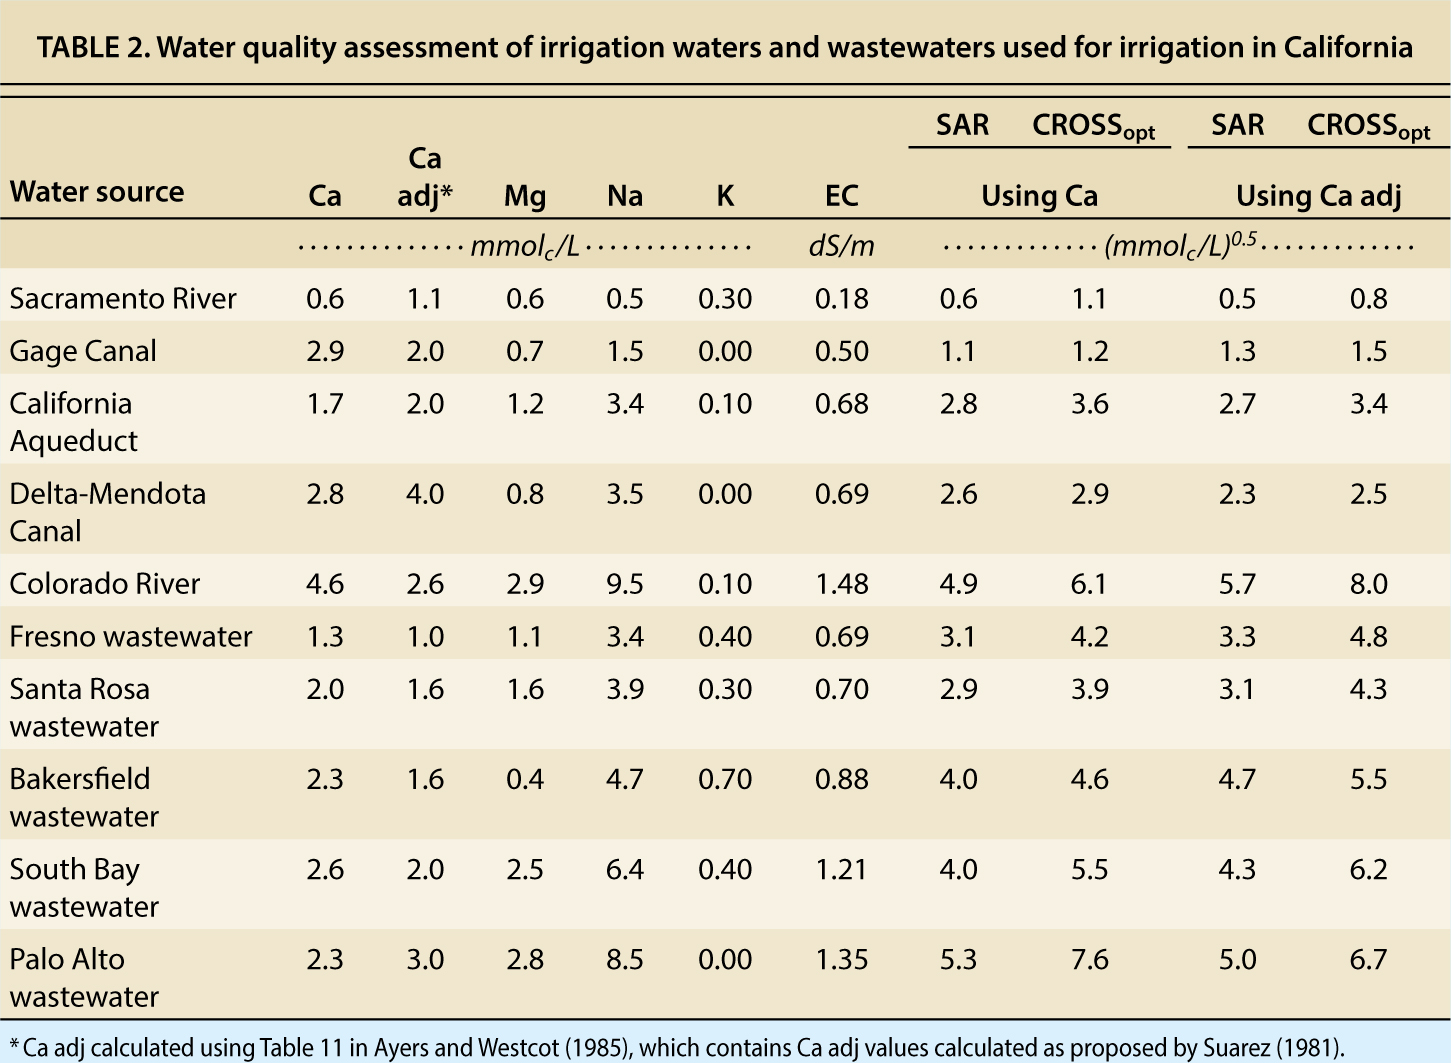 Water quality assessment of irrigation waters and wastewaters used for irrigation in California